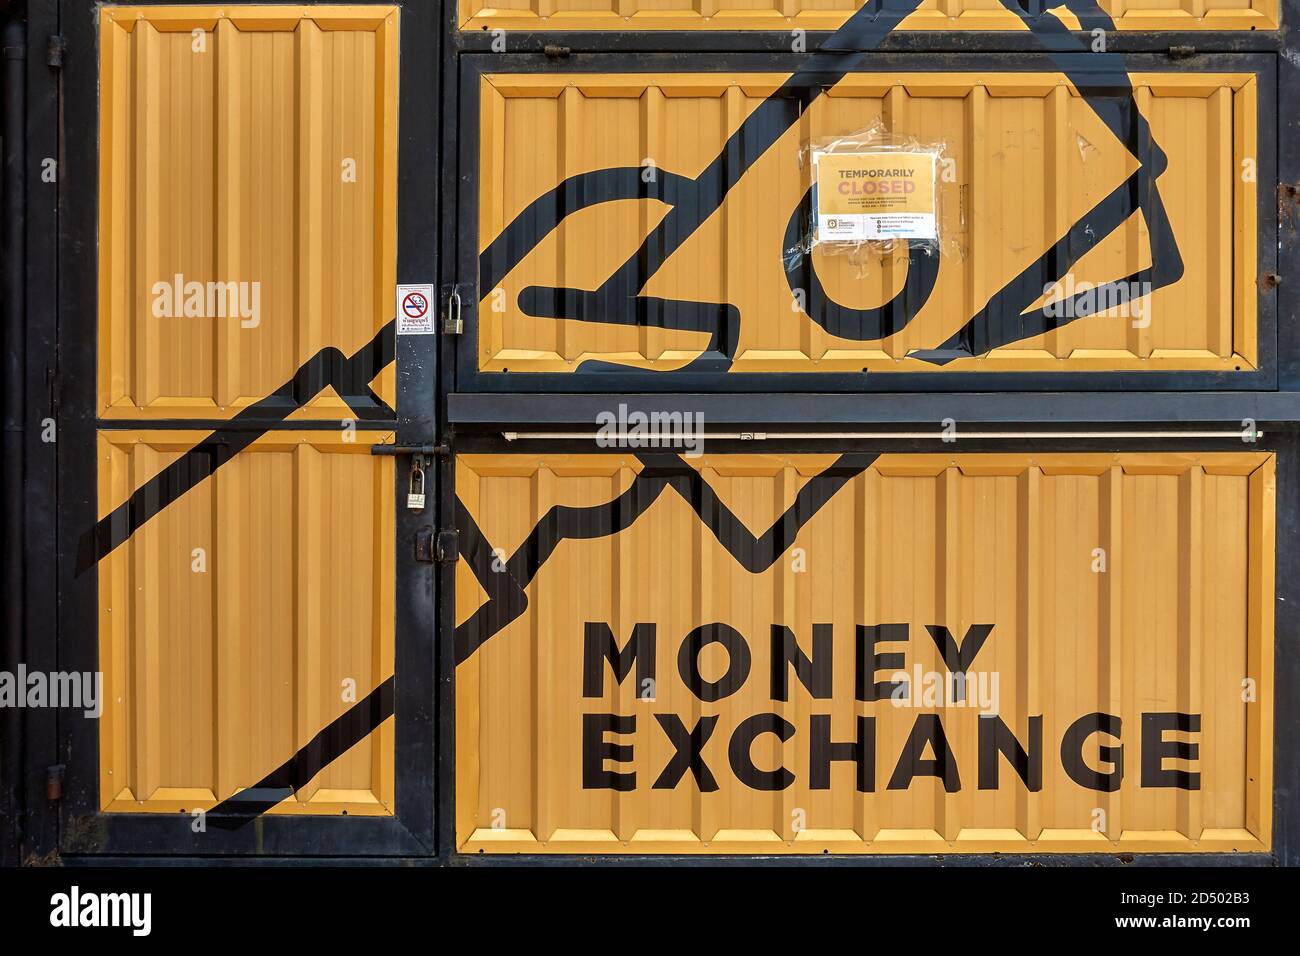 Covid business effect. Money exchange booth temporarily closed Stock Photo